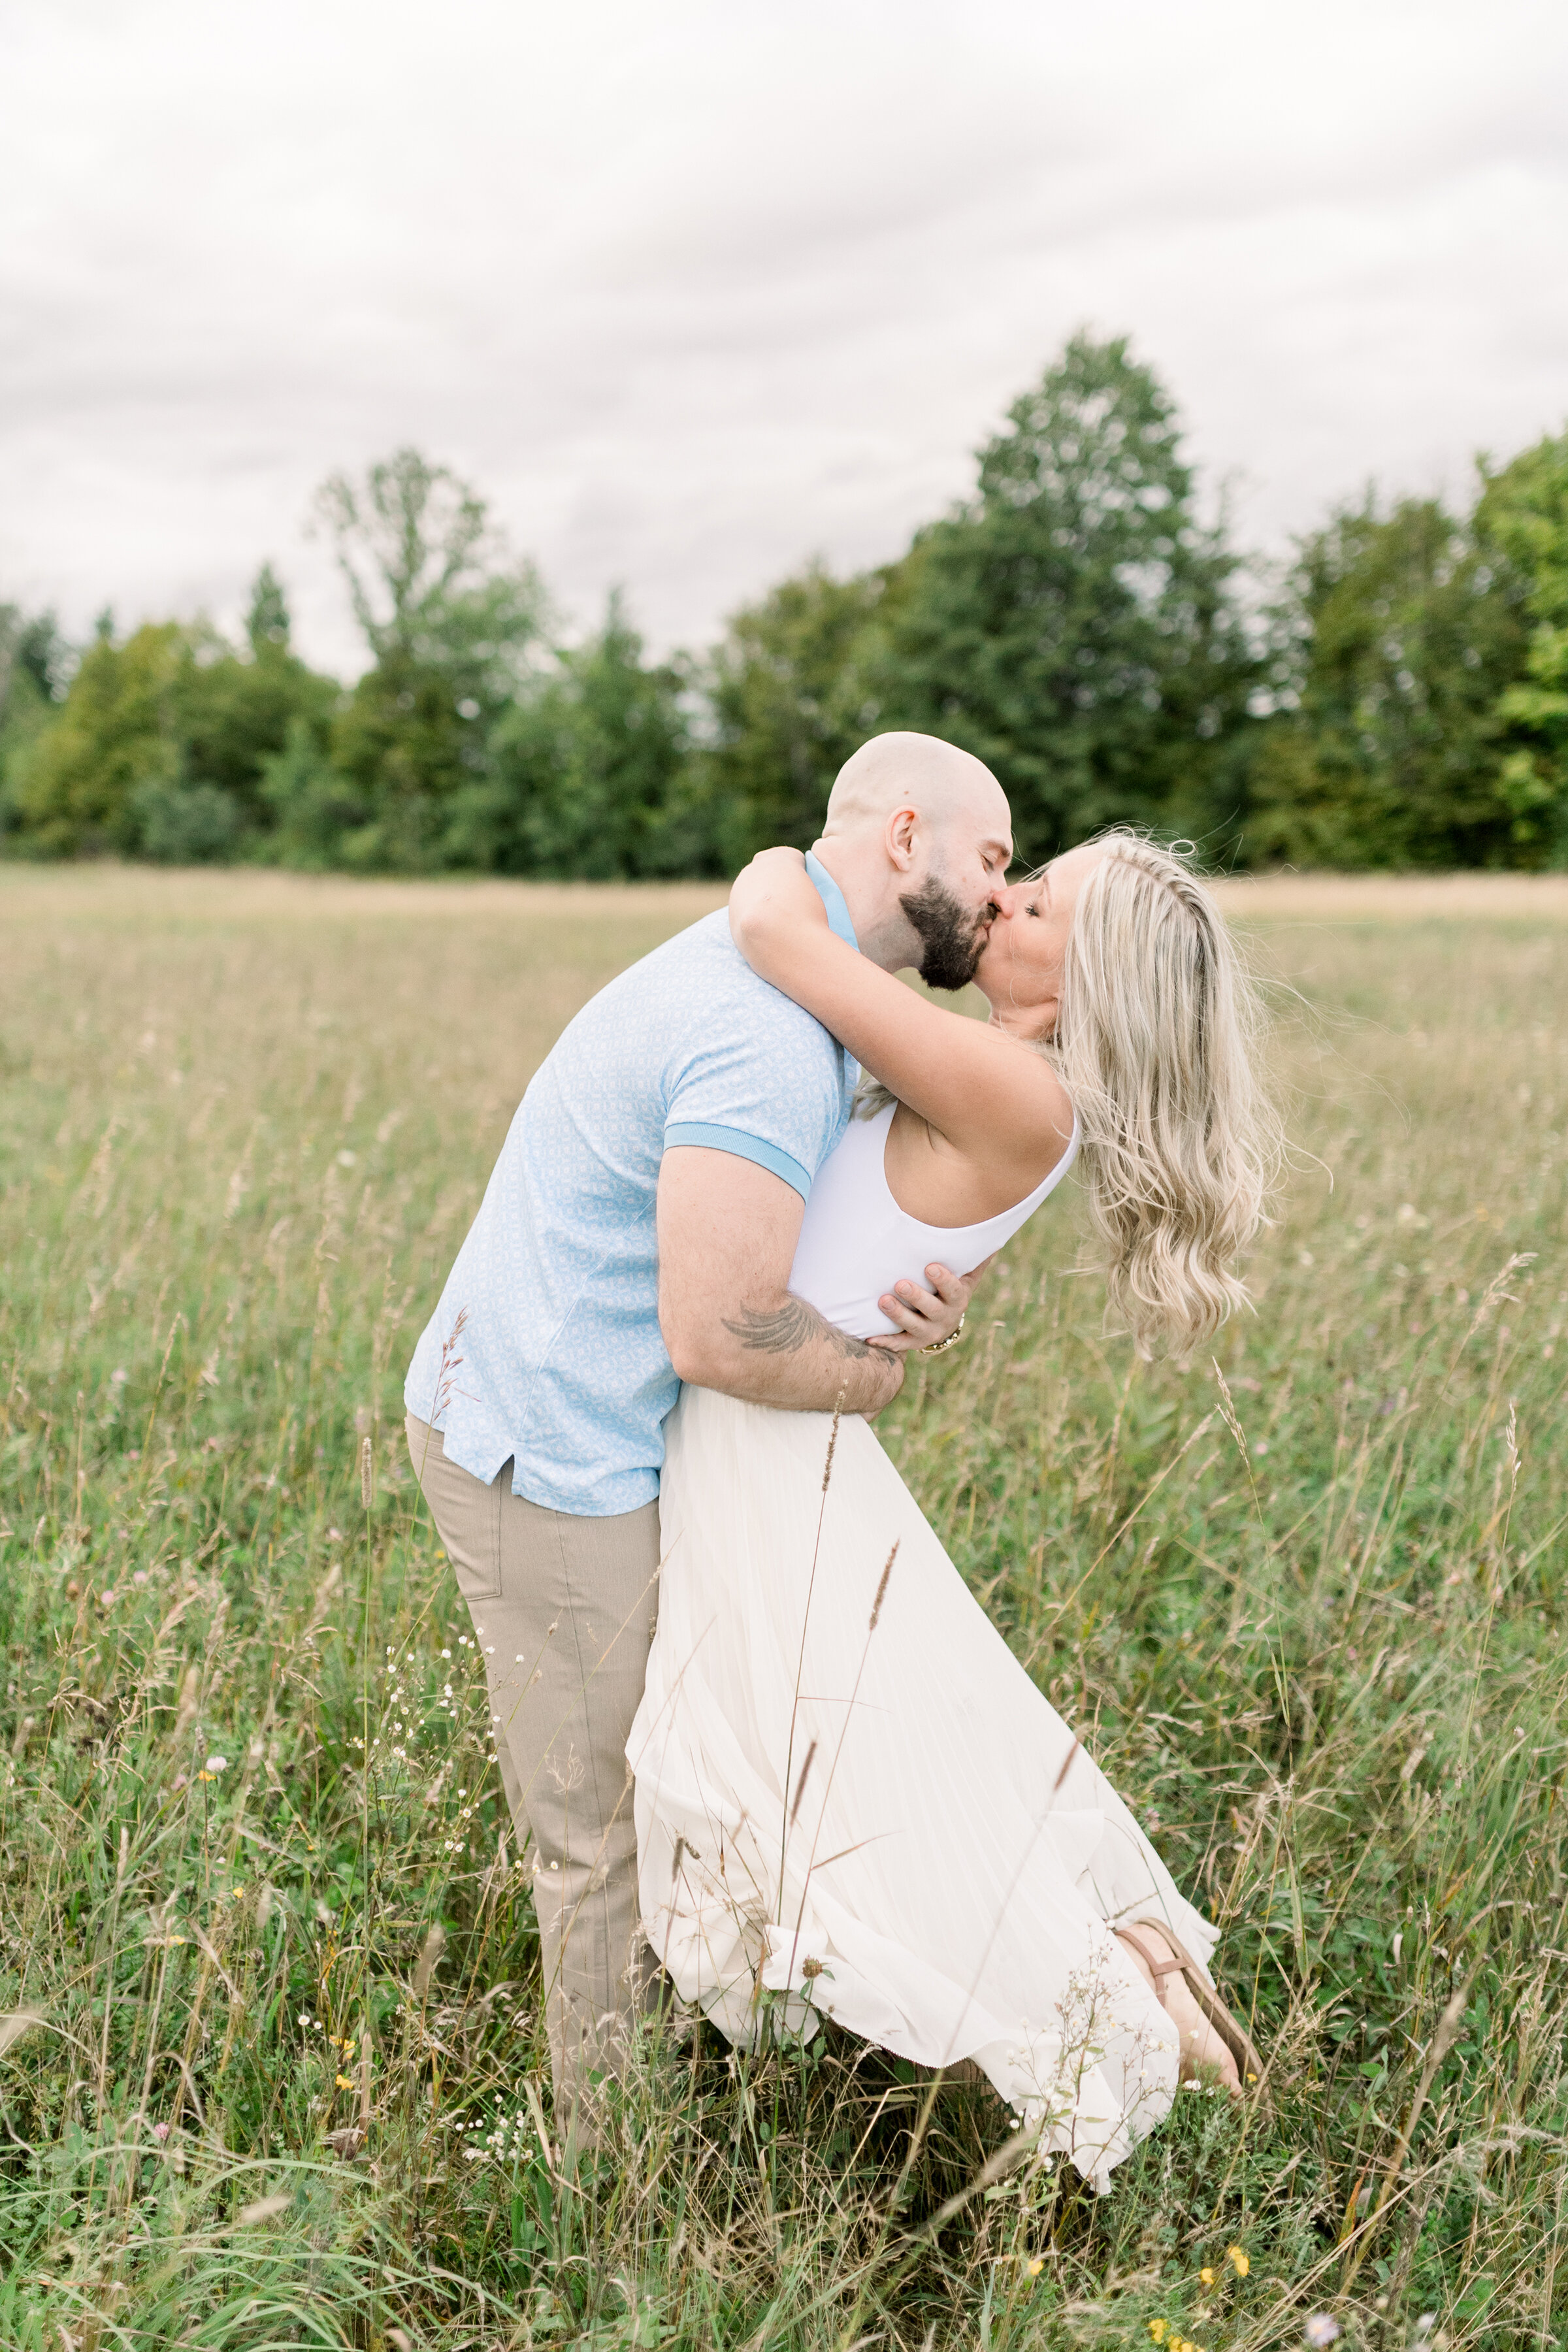  A handsome groom dips his beautiful fiancé as they kiss in a stunning grassy field in an engagement session by Chelsea Mason Photography in Ashton, Ontario. Couple goals couple kissing pose inspiration ideas and goals outdoor photo shoot inspiration